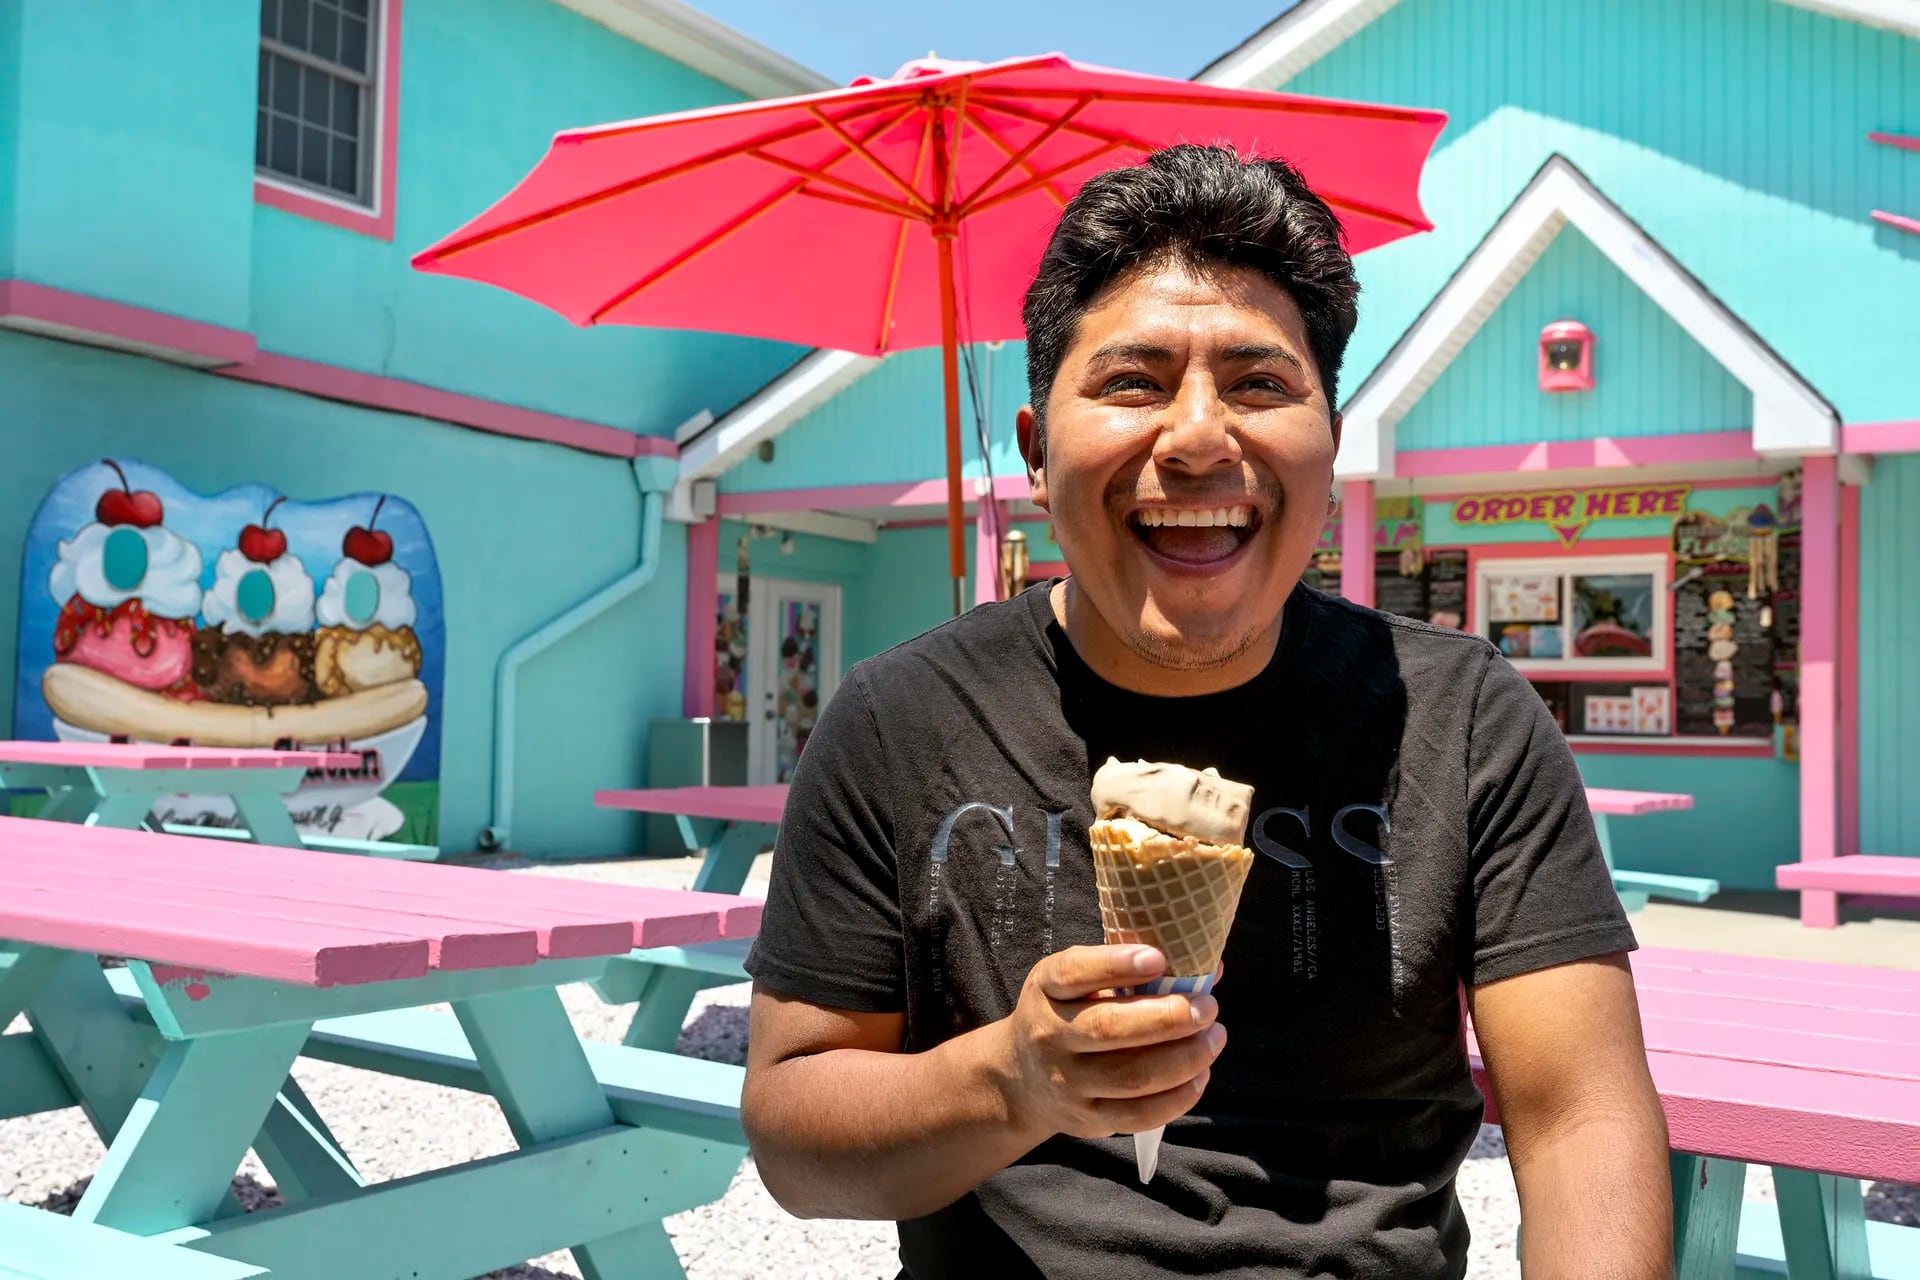 Hugo Riano, of Stone Harbor, has a coffee ice cream cone at the Ice Cream Station in Cape May Court House.